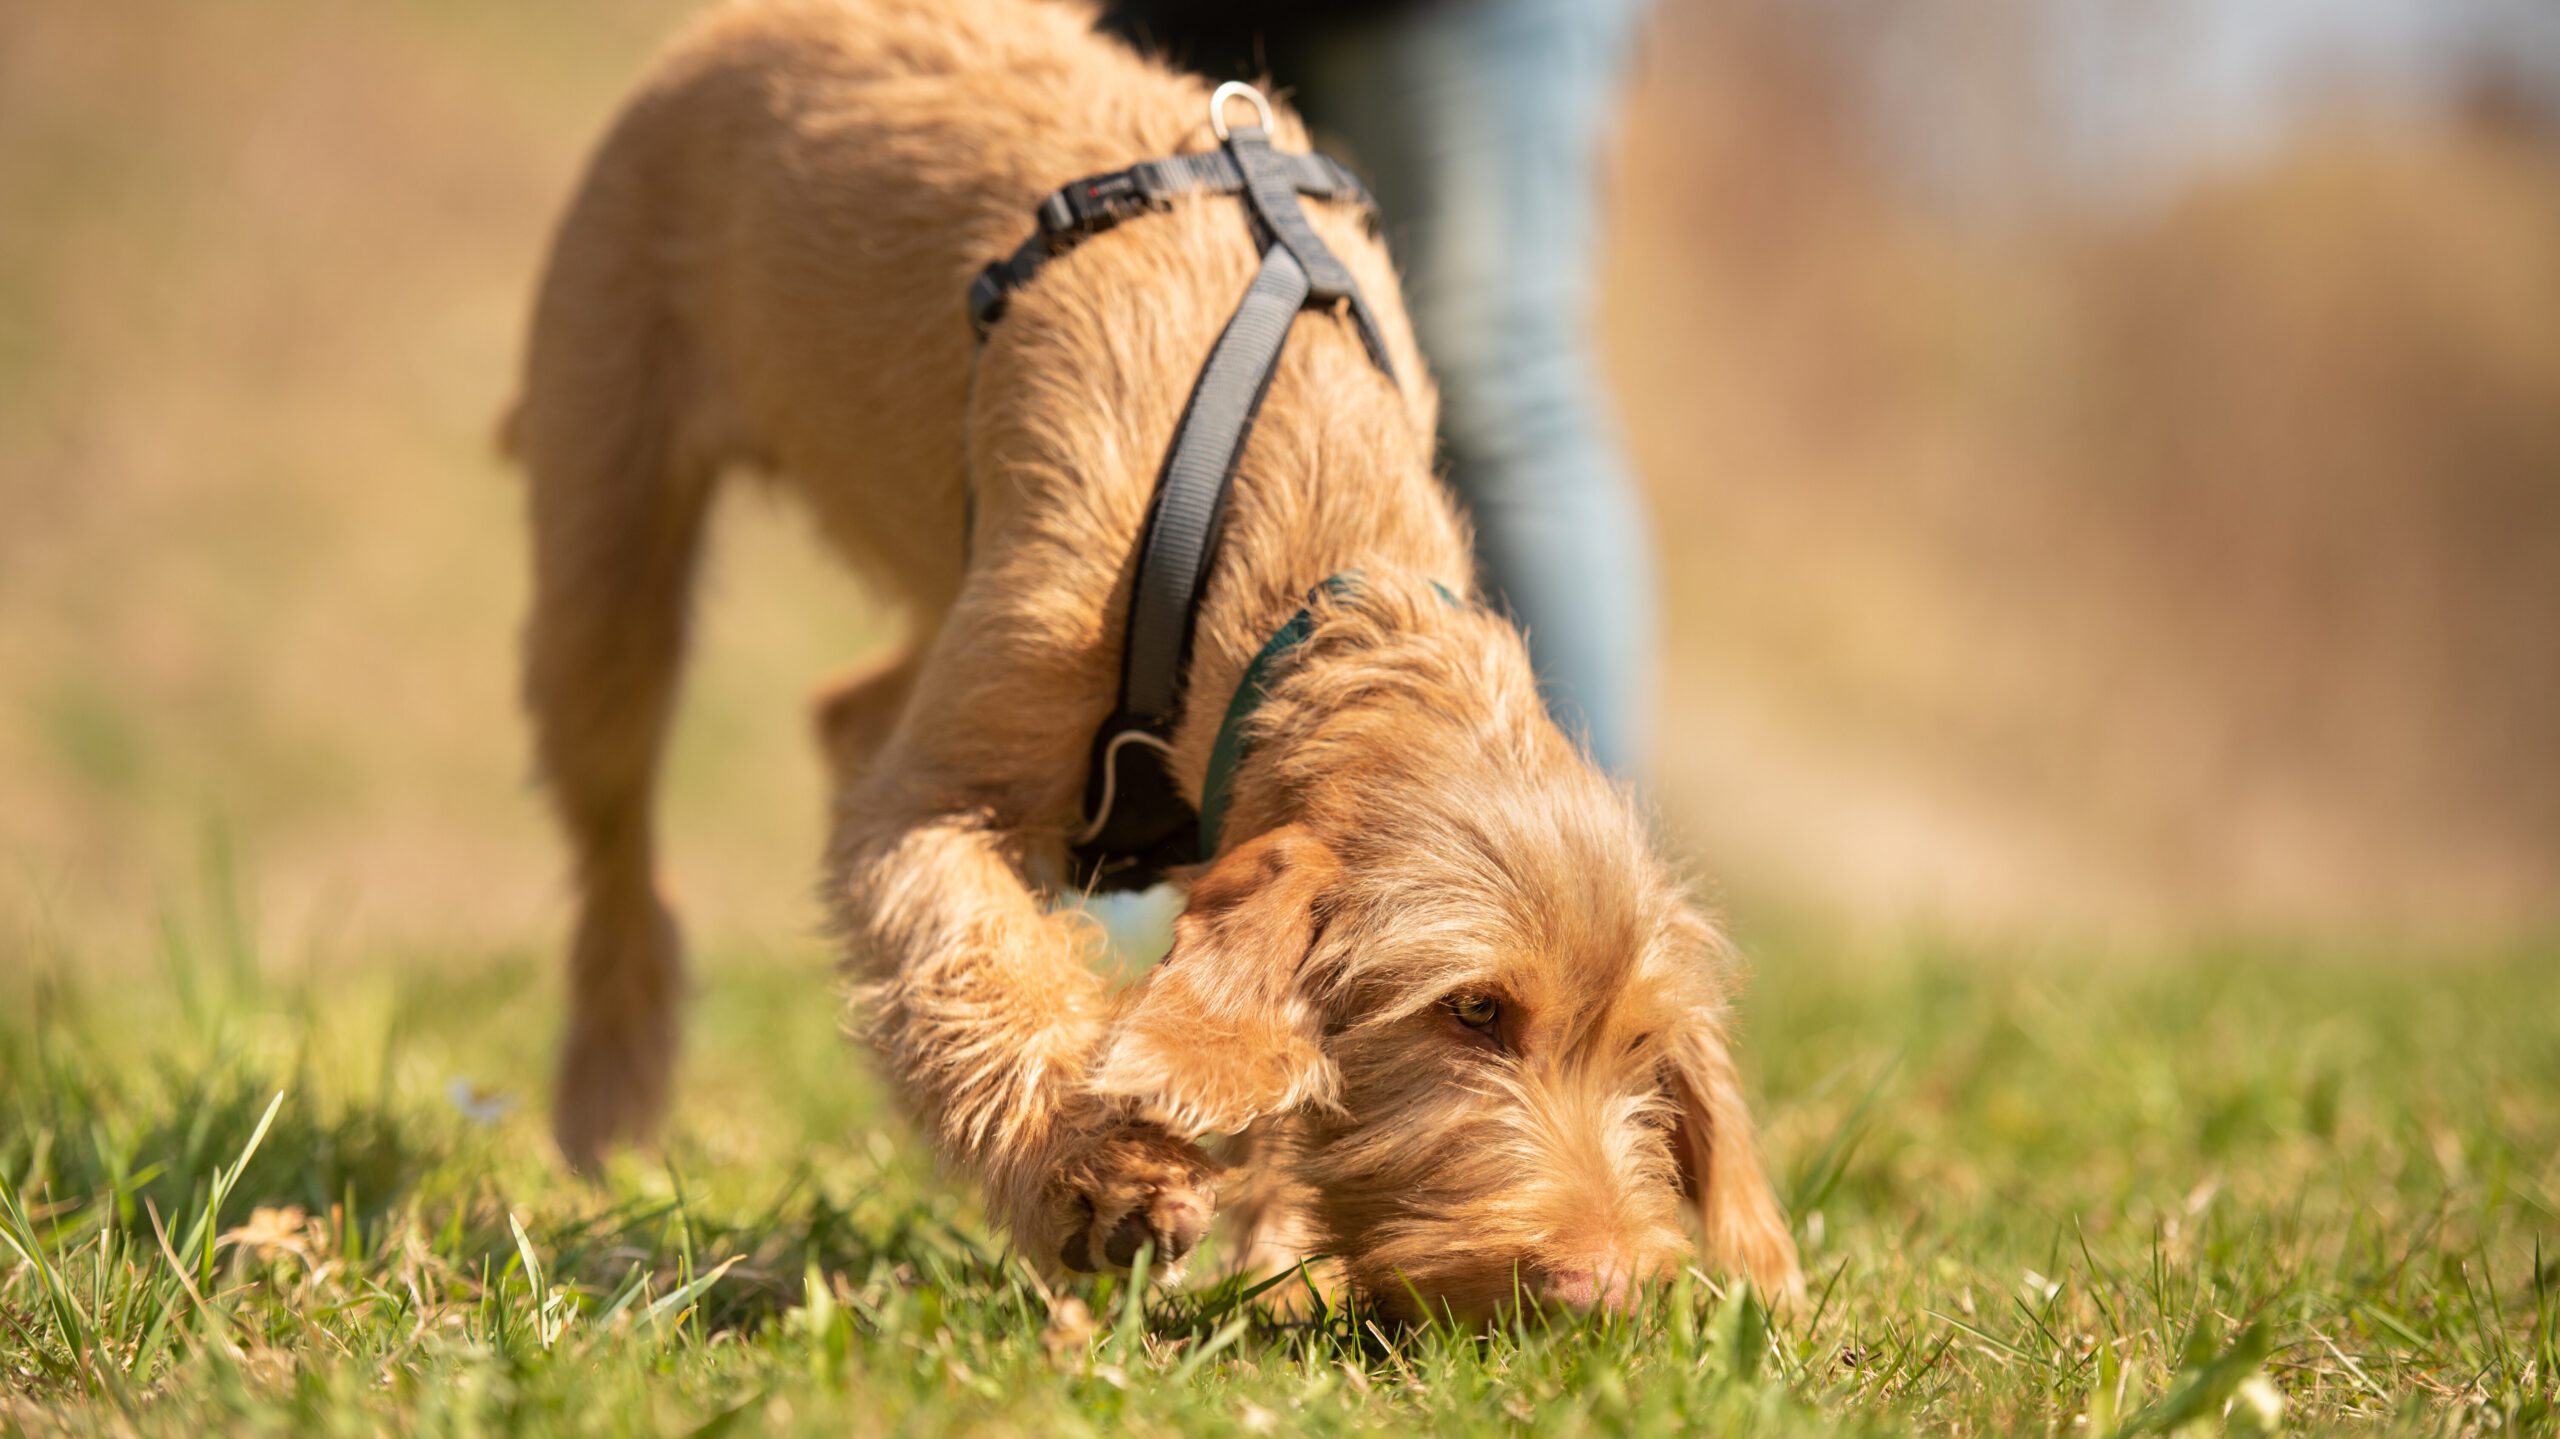 With a few simple techniques and consistent training, you can help your canine companion overcome this scavenging behavior.